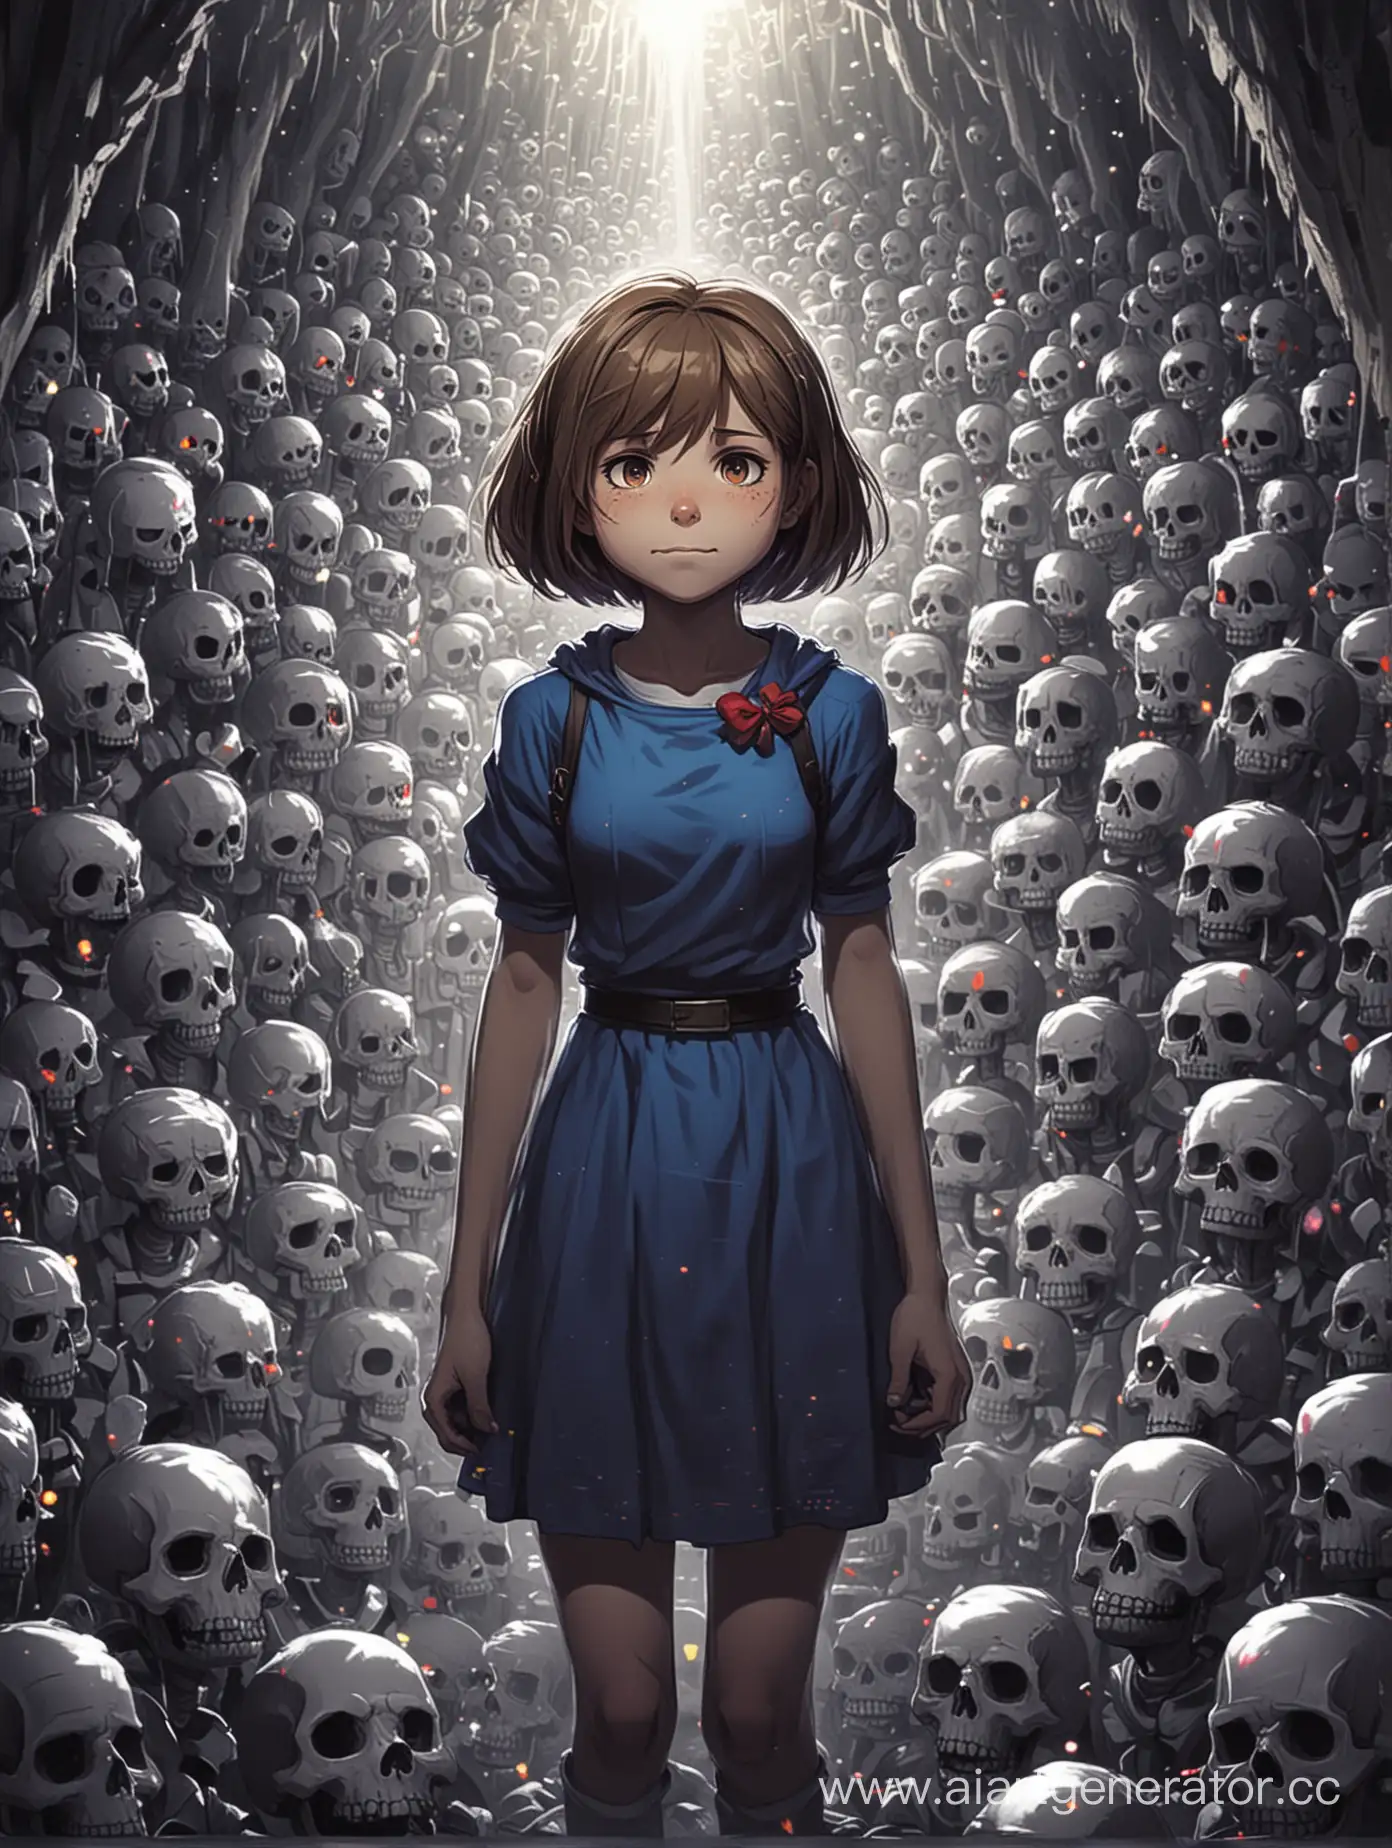 Undertale-Frisk-Surrounded-by-Human-Souls